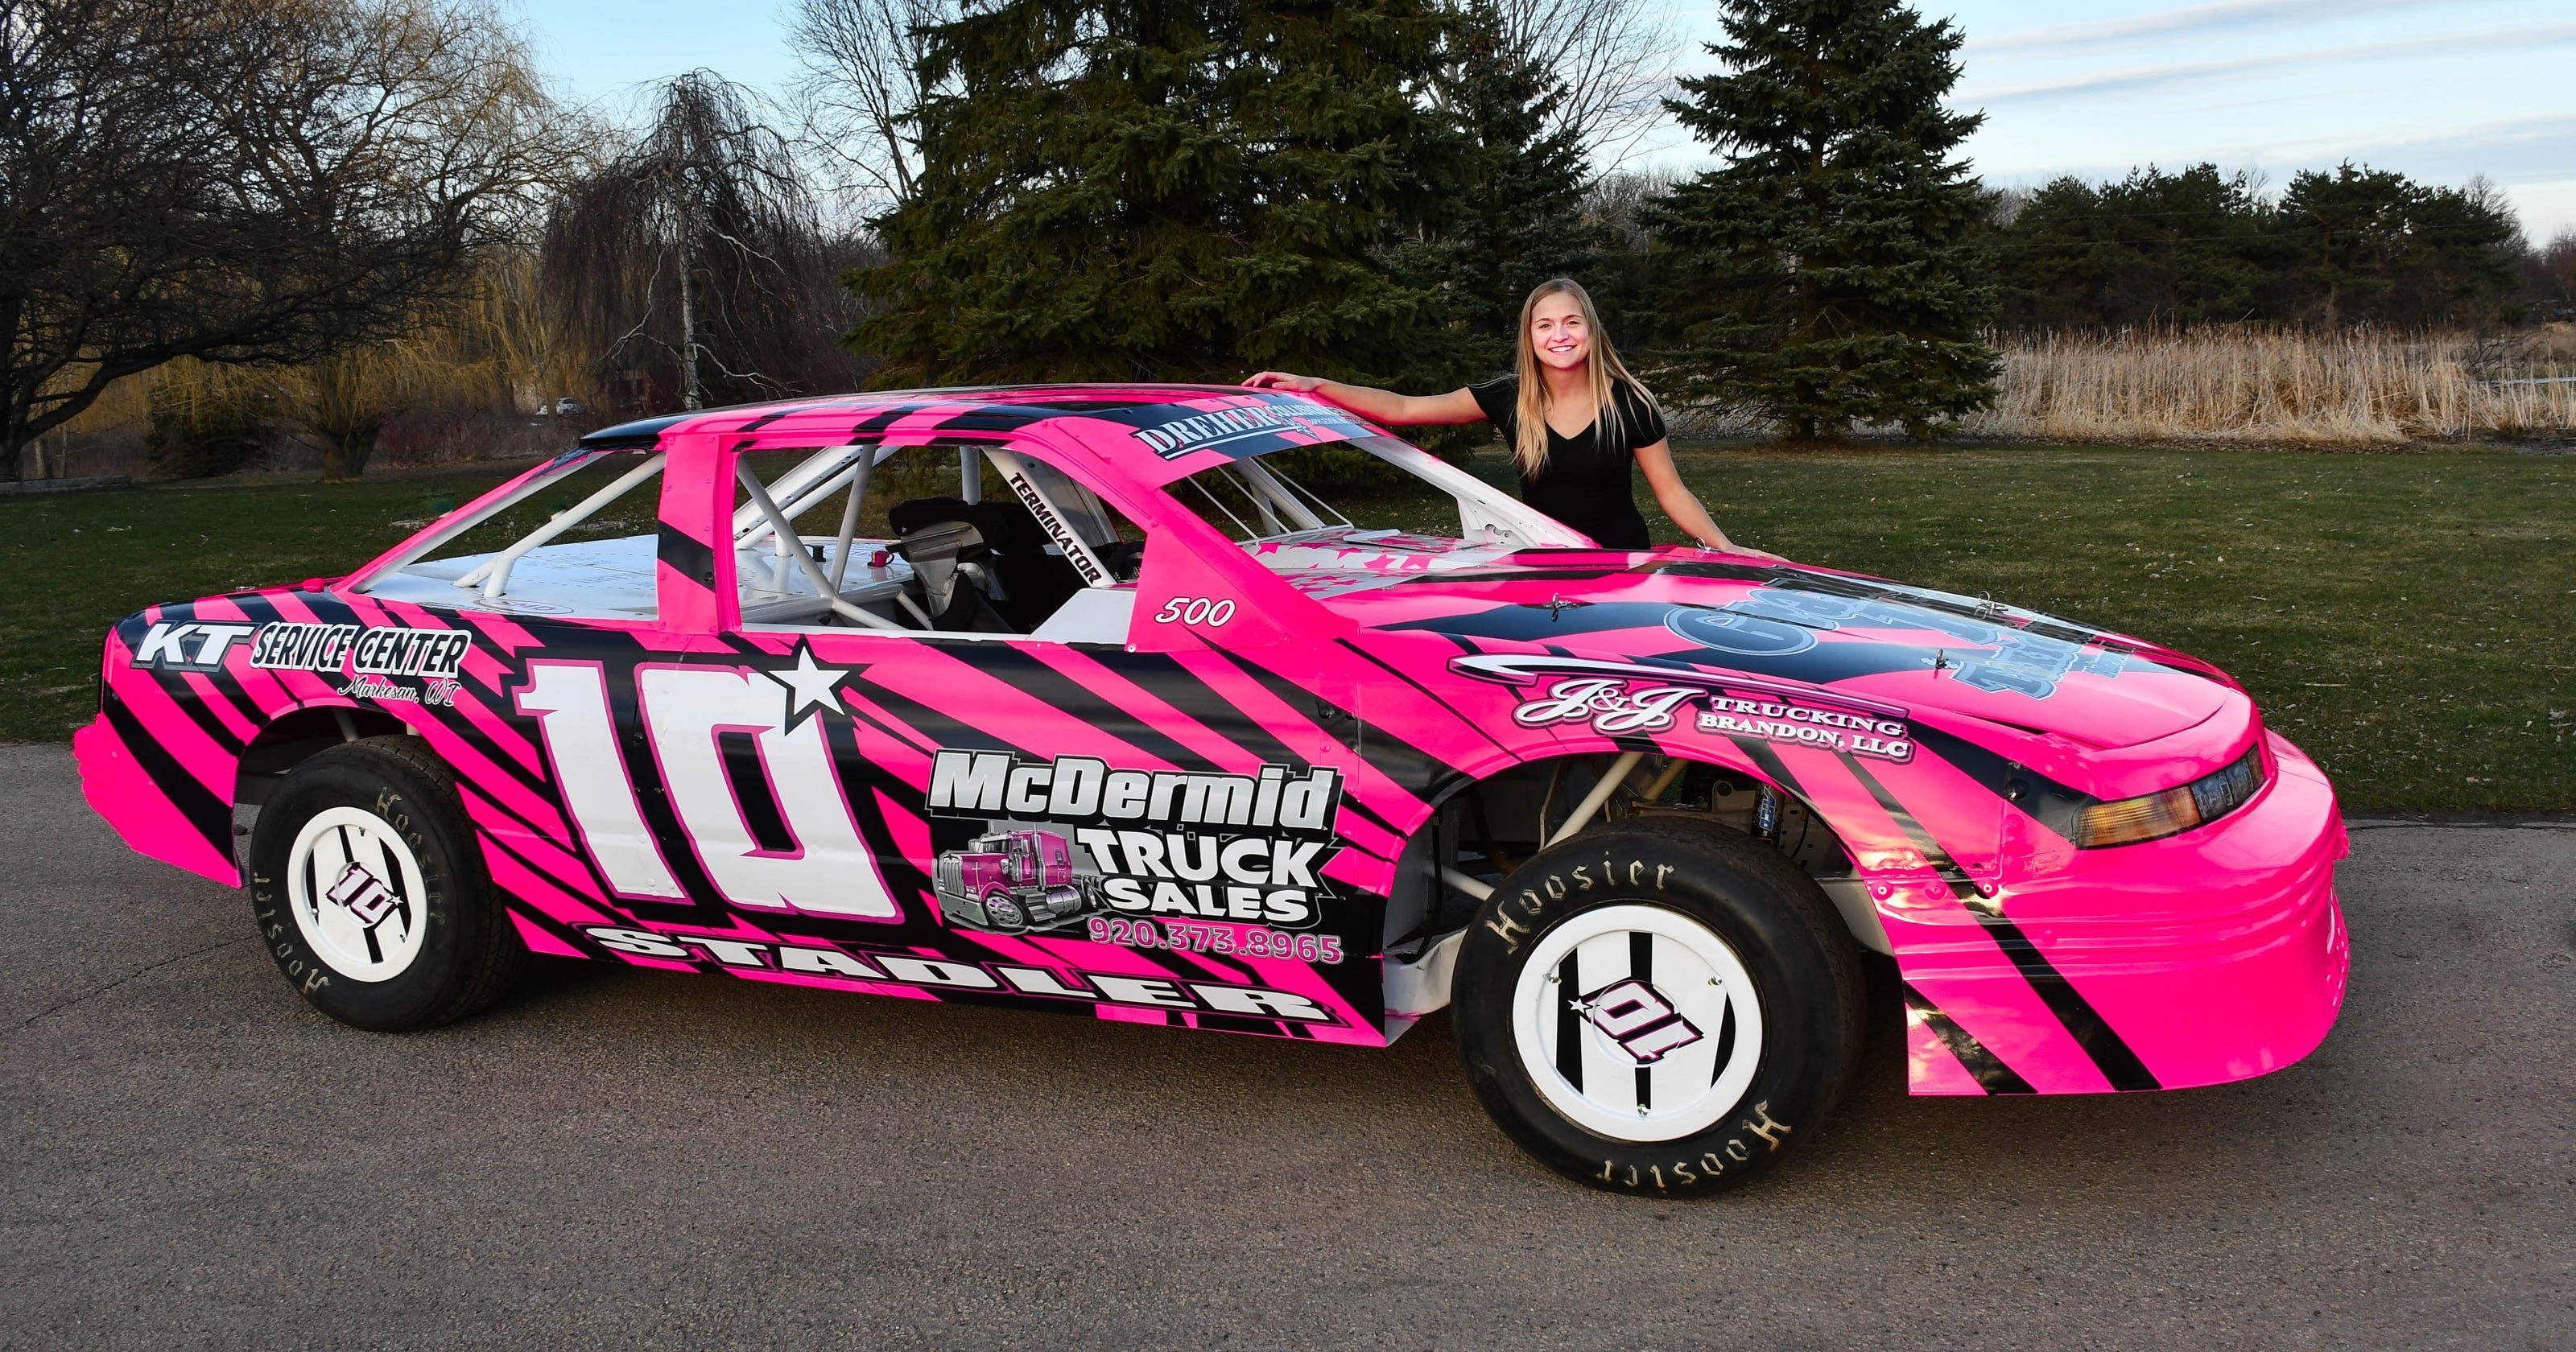 Dirt-track racing: Karly Stadler heads north for new ...